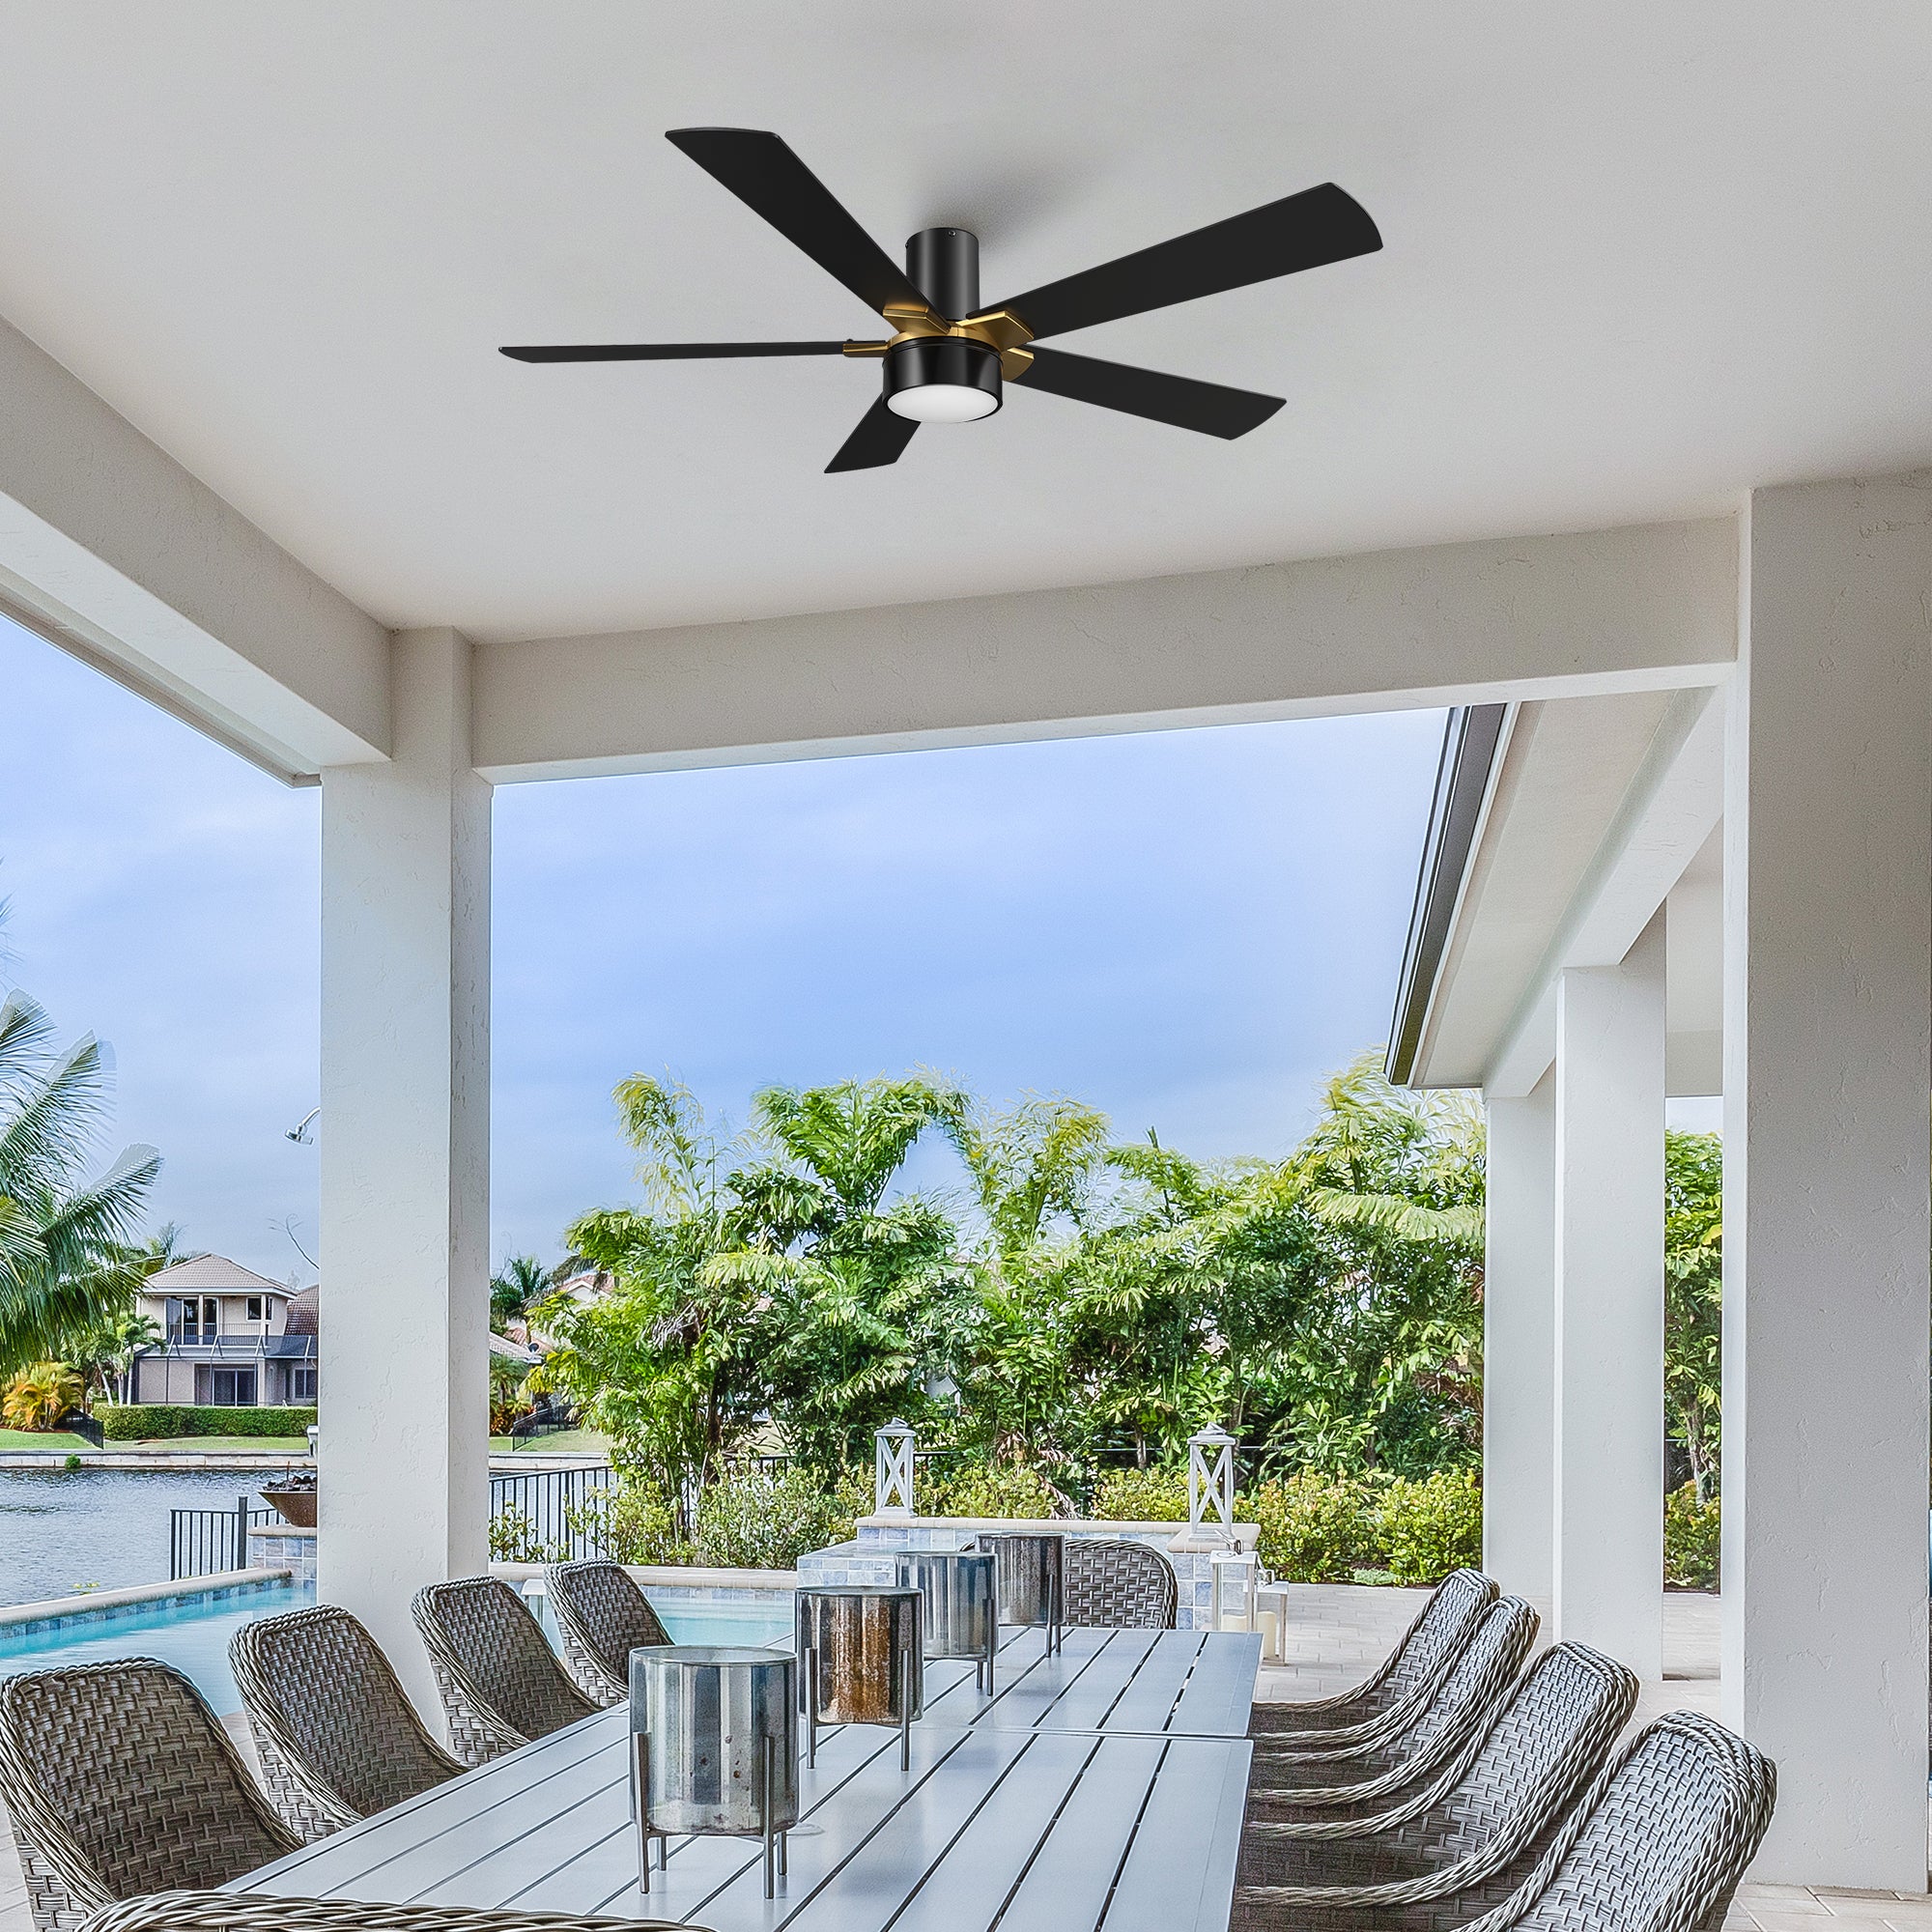 This Duluth 52&quot; smart ceiling fan keeps your space cool, bright, and stylish. It is a soft modern masterpiece perfect for your large indoor living spaces. This Wifi smart ceiling fan is a simplicity designing with Black finish, use elegant Plywood blades and has an integrated 4000K LED cool light. The fan features Remote control, Wi-Fi apps, Siri Shortcut and Voice control technology (compatible with Amazon Alexa and Google Home Assistant ) to set fan preferences.